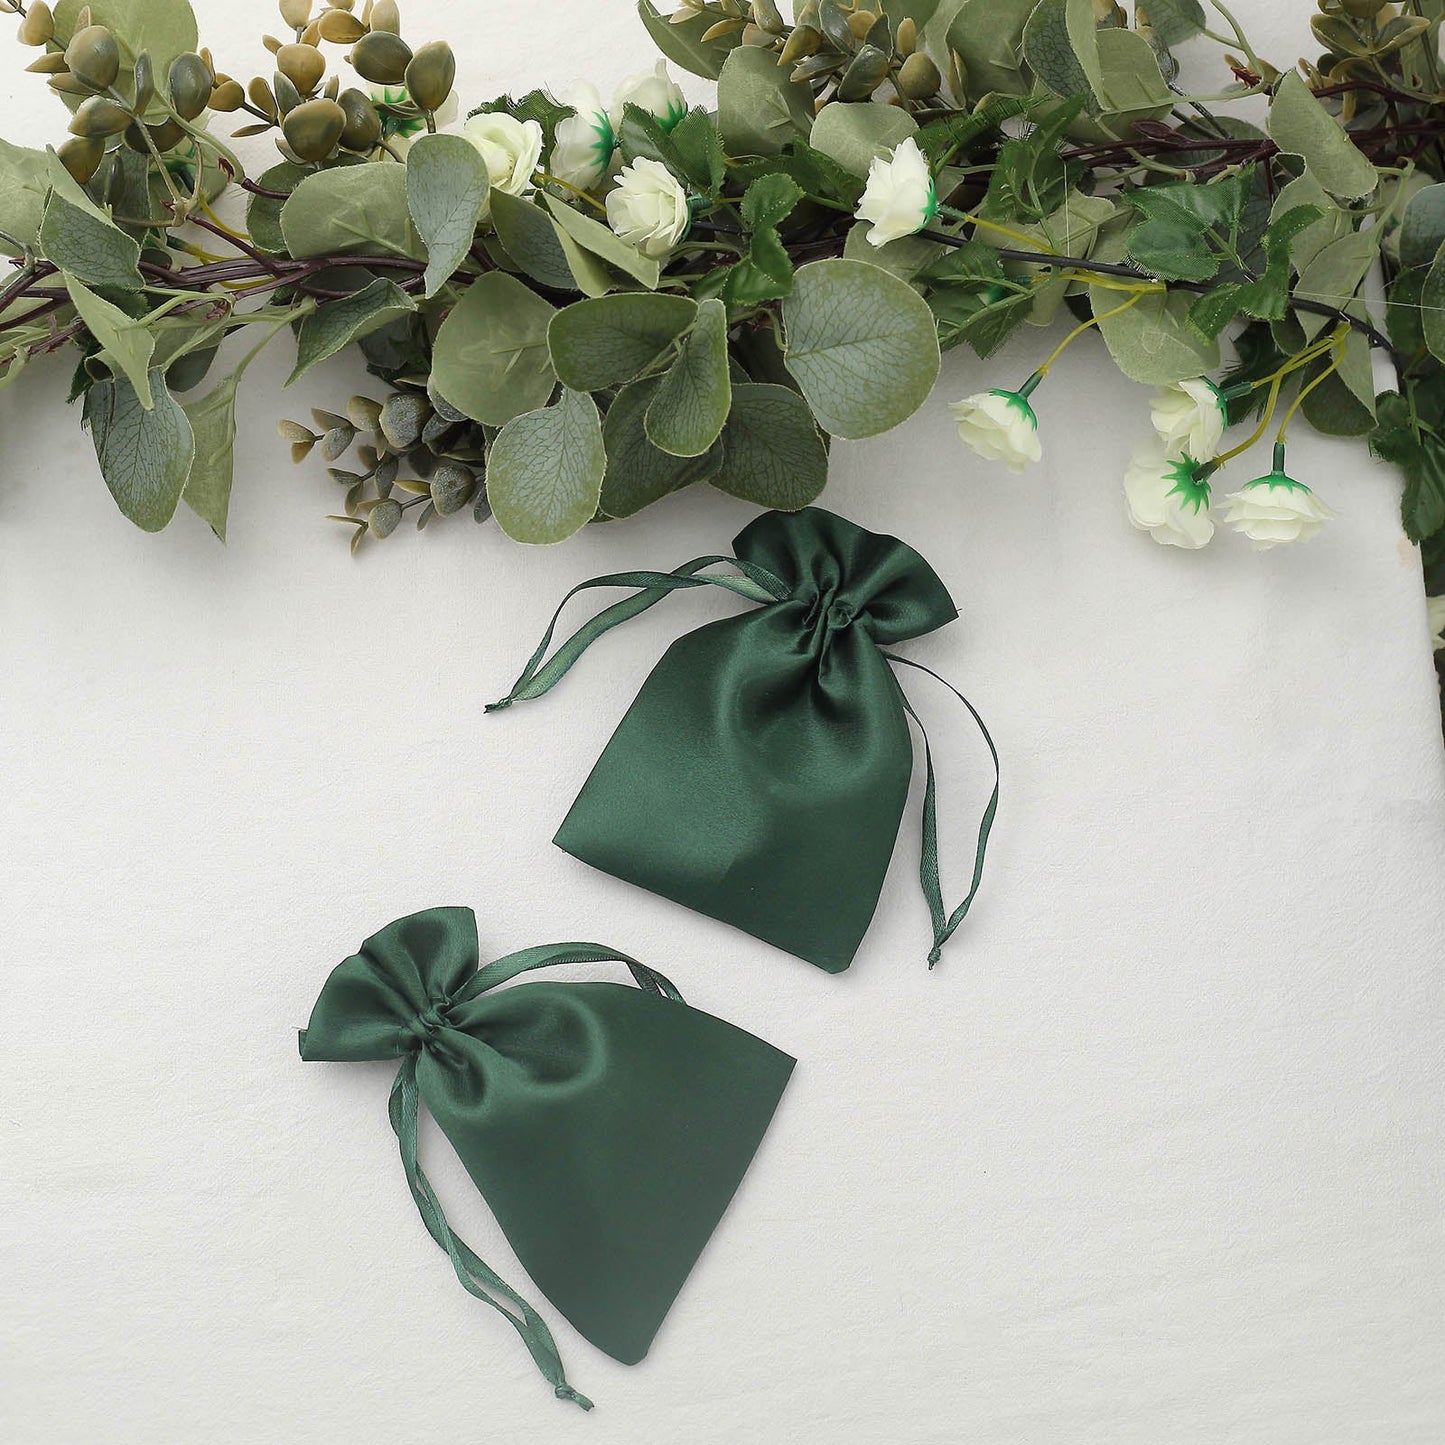 12 Pack 4"x6" Hunter Emerald Green Satin Wedding Party Favor Bags, Drawstring Pouch Gift Bags